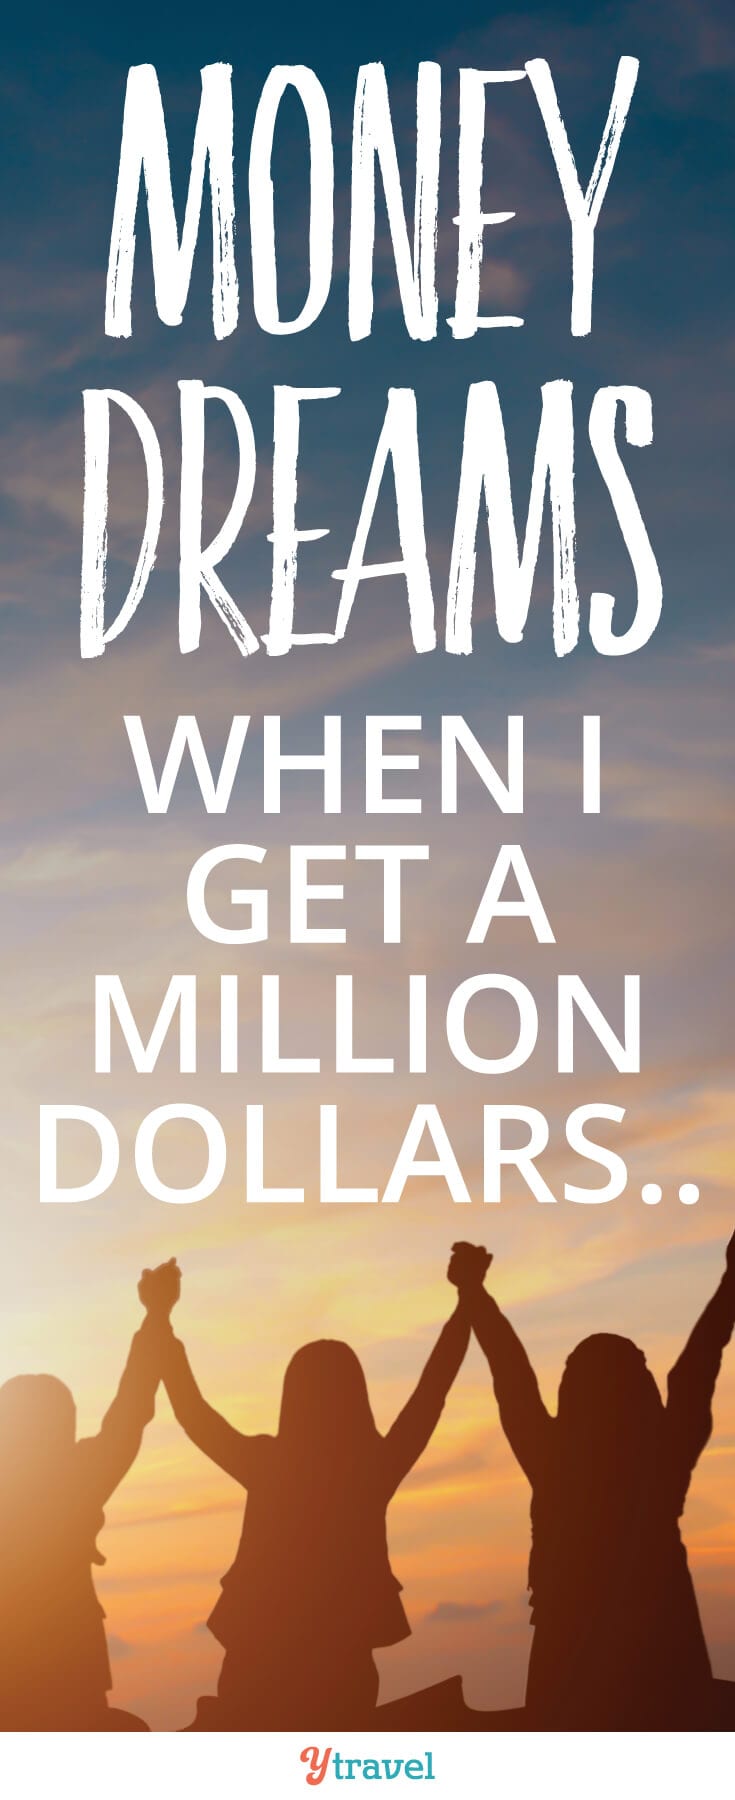 Don't let your money dreams consume your life. Take control and stop wishing for that million dollars and start living.